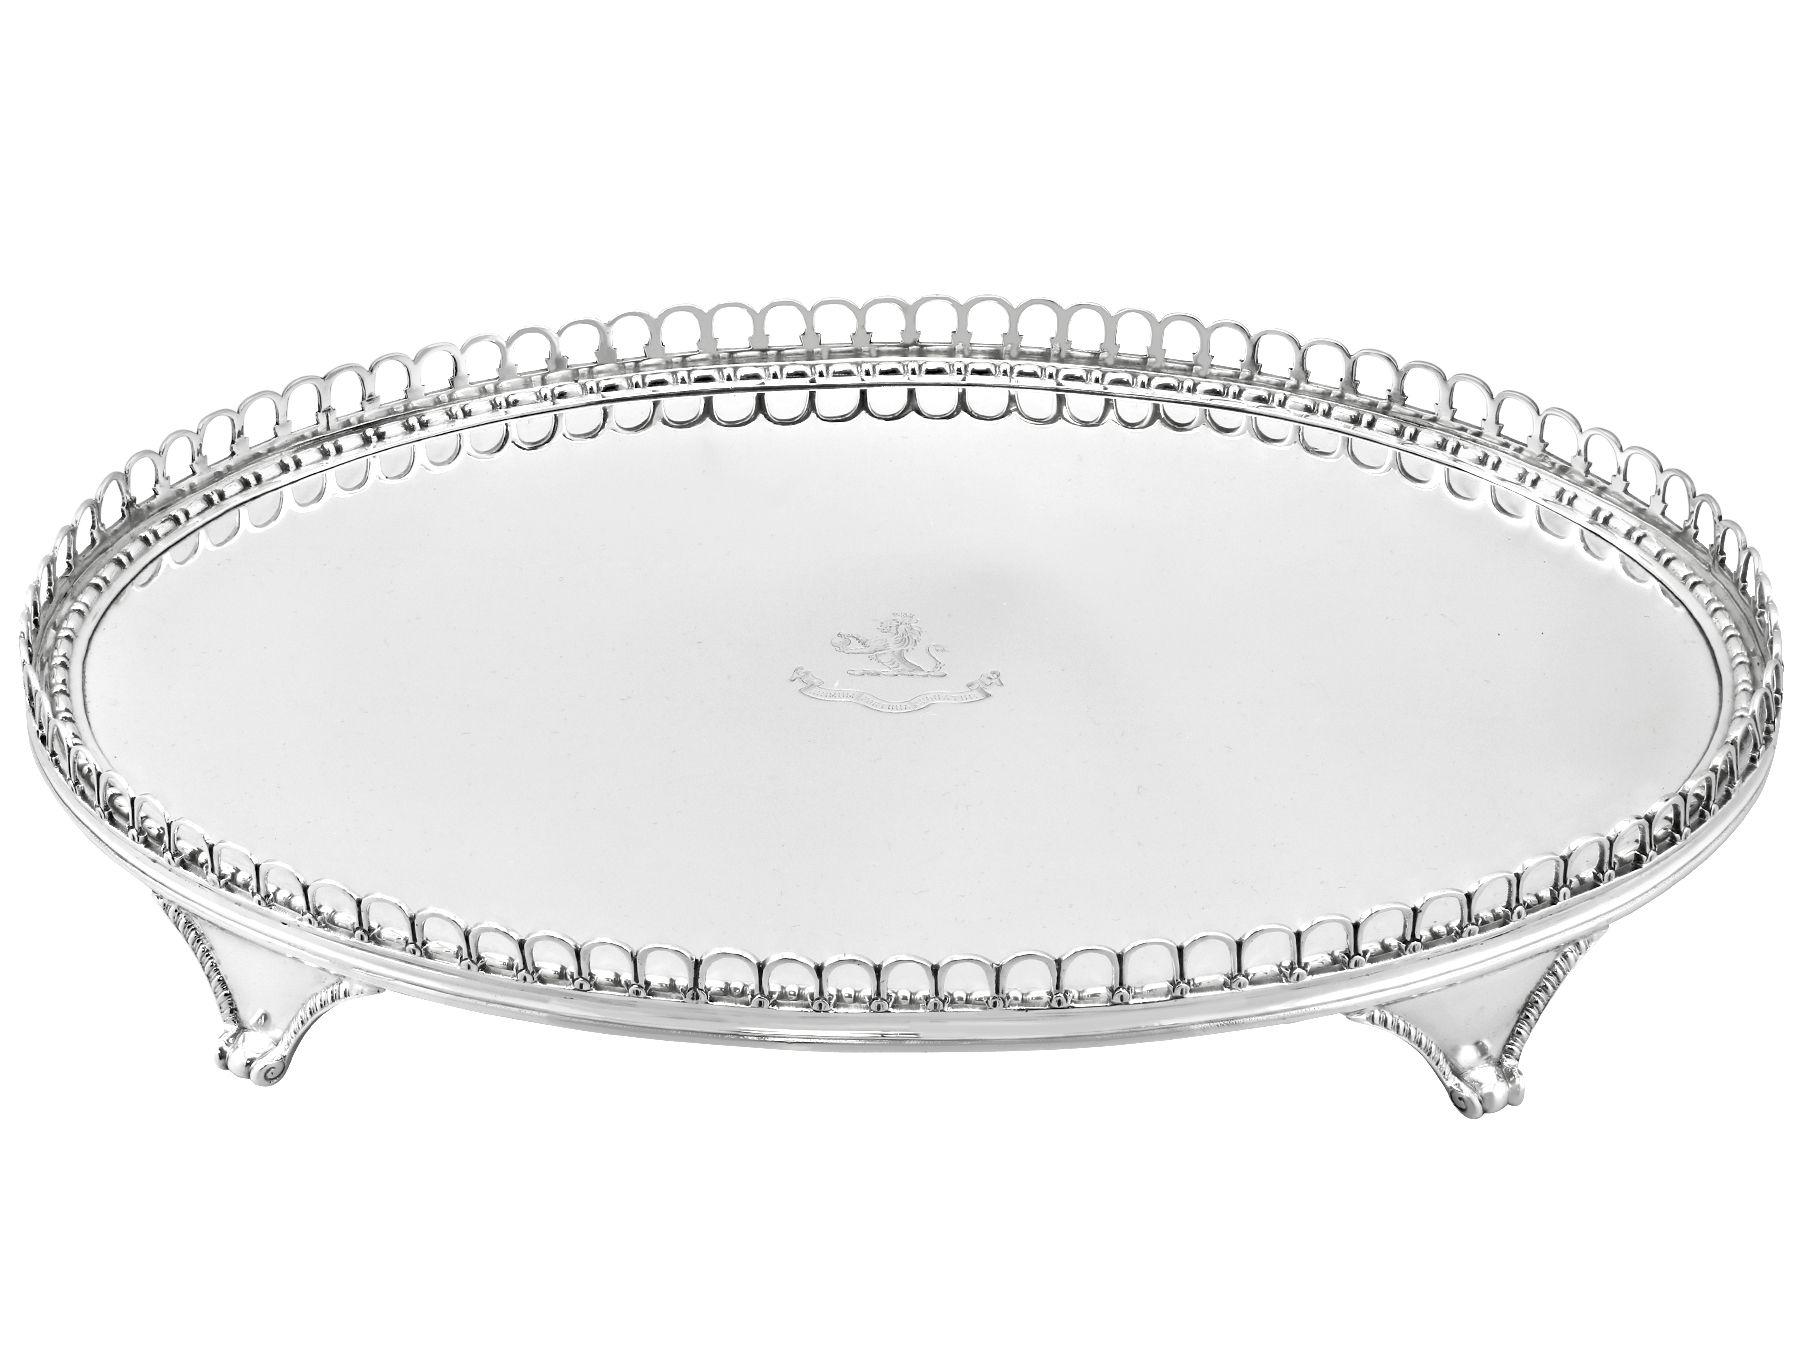 An exceptional, fine and impressive antique Edwardian English sterling silver salver - boxed; part of our dining silverware collection

This exceptional antique Edwardian sterling silver salver has a plain oval form.

The surface of this large